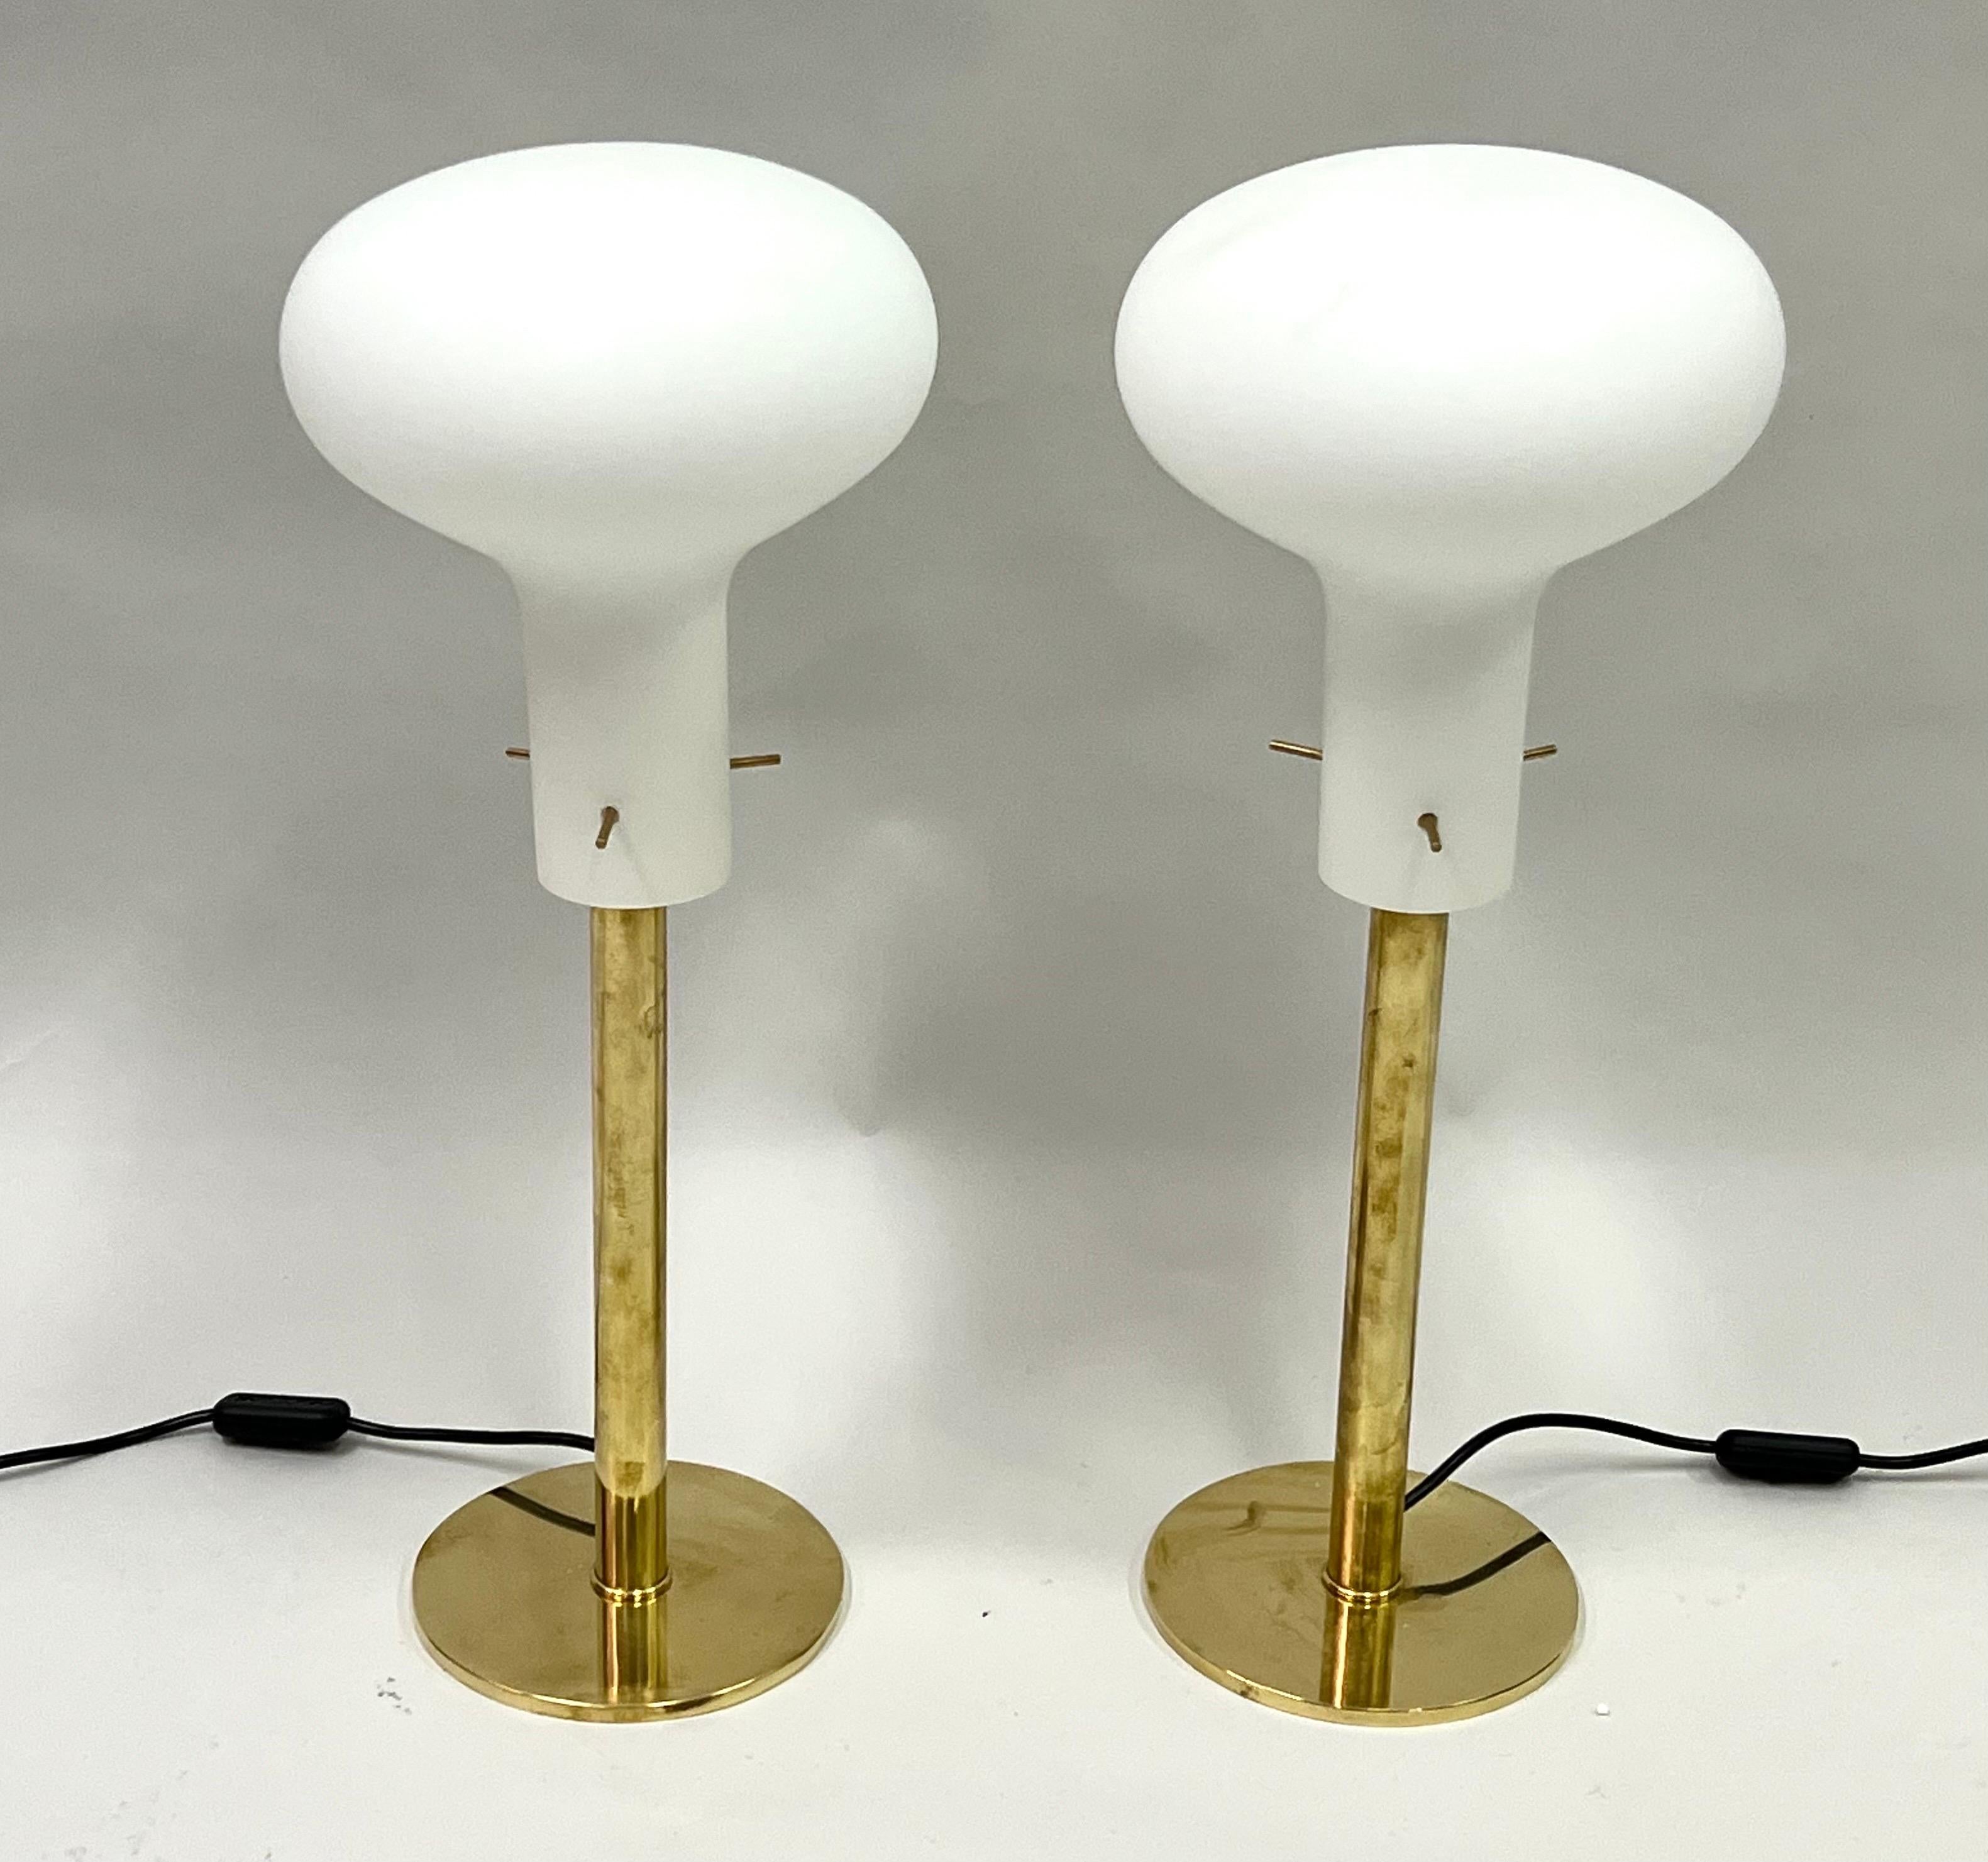 Pair of Italian Mid-Century Modern Brass Table Lamps, Max Ingrand & Fontana Arte For Sale 6